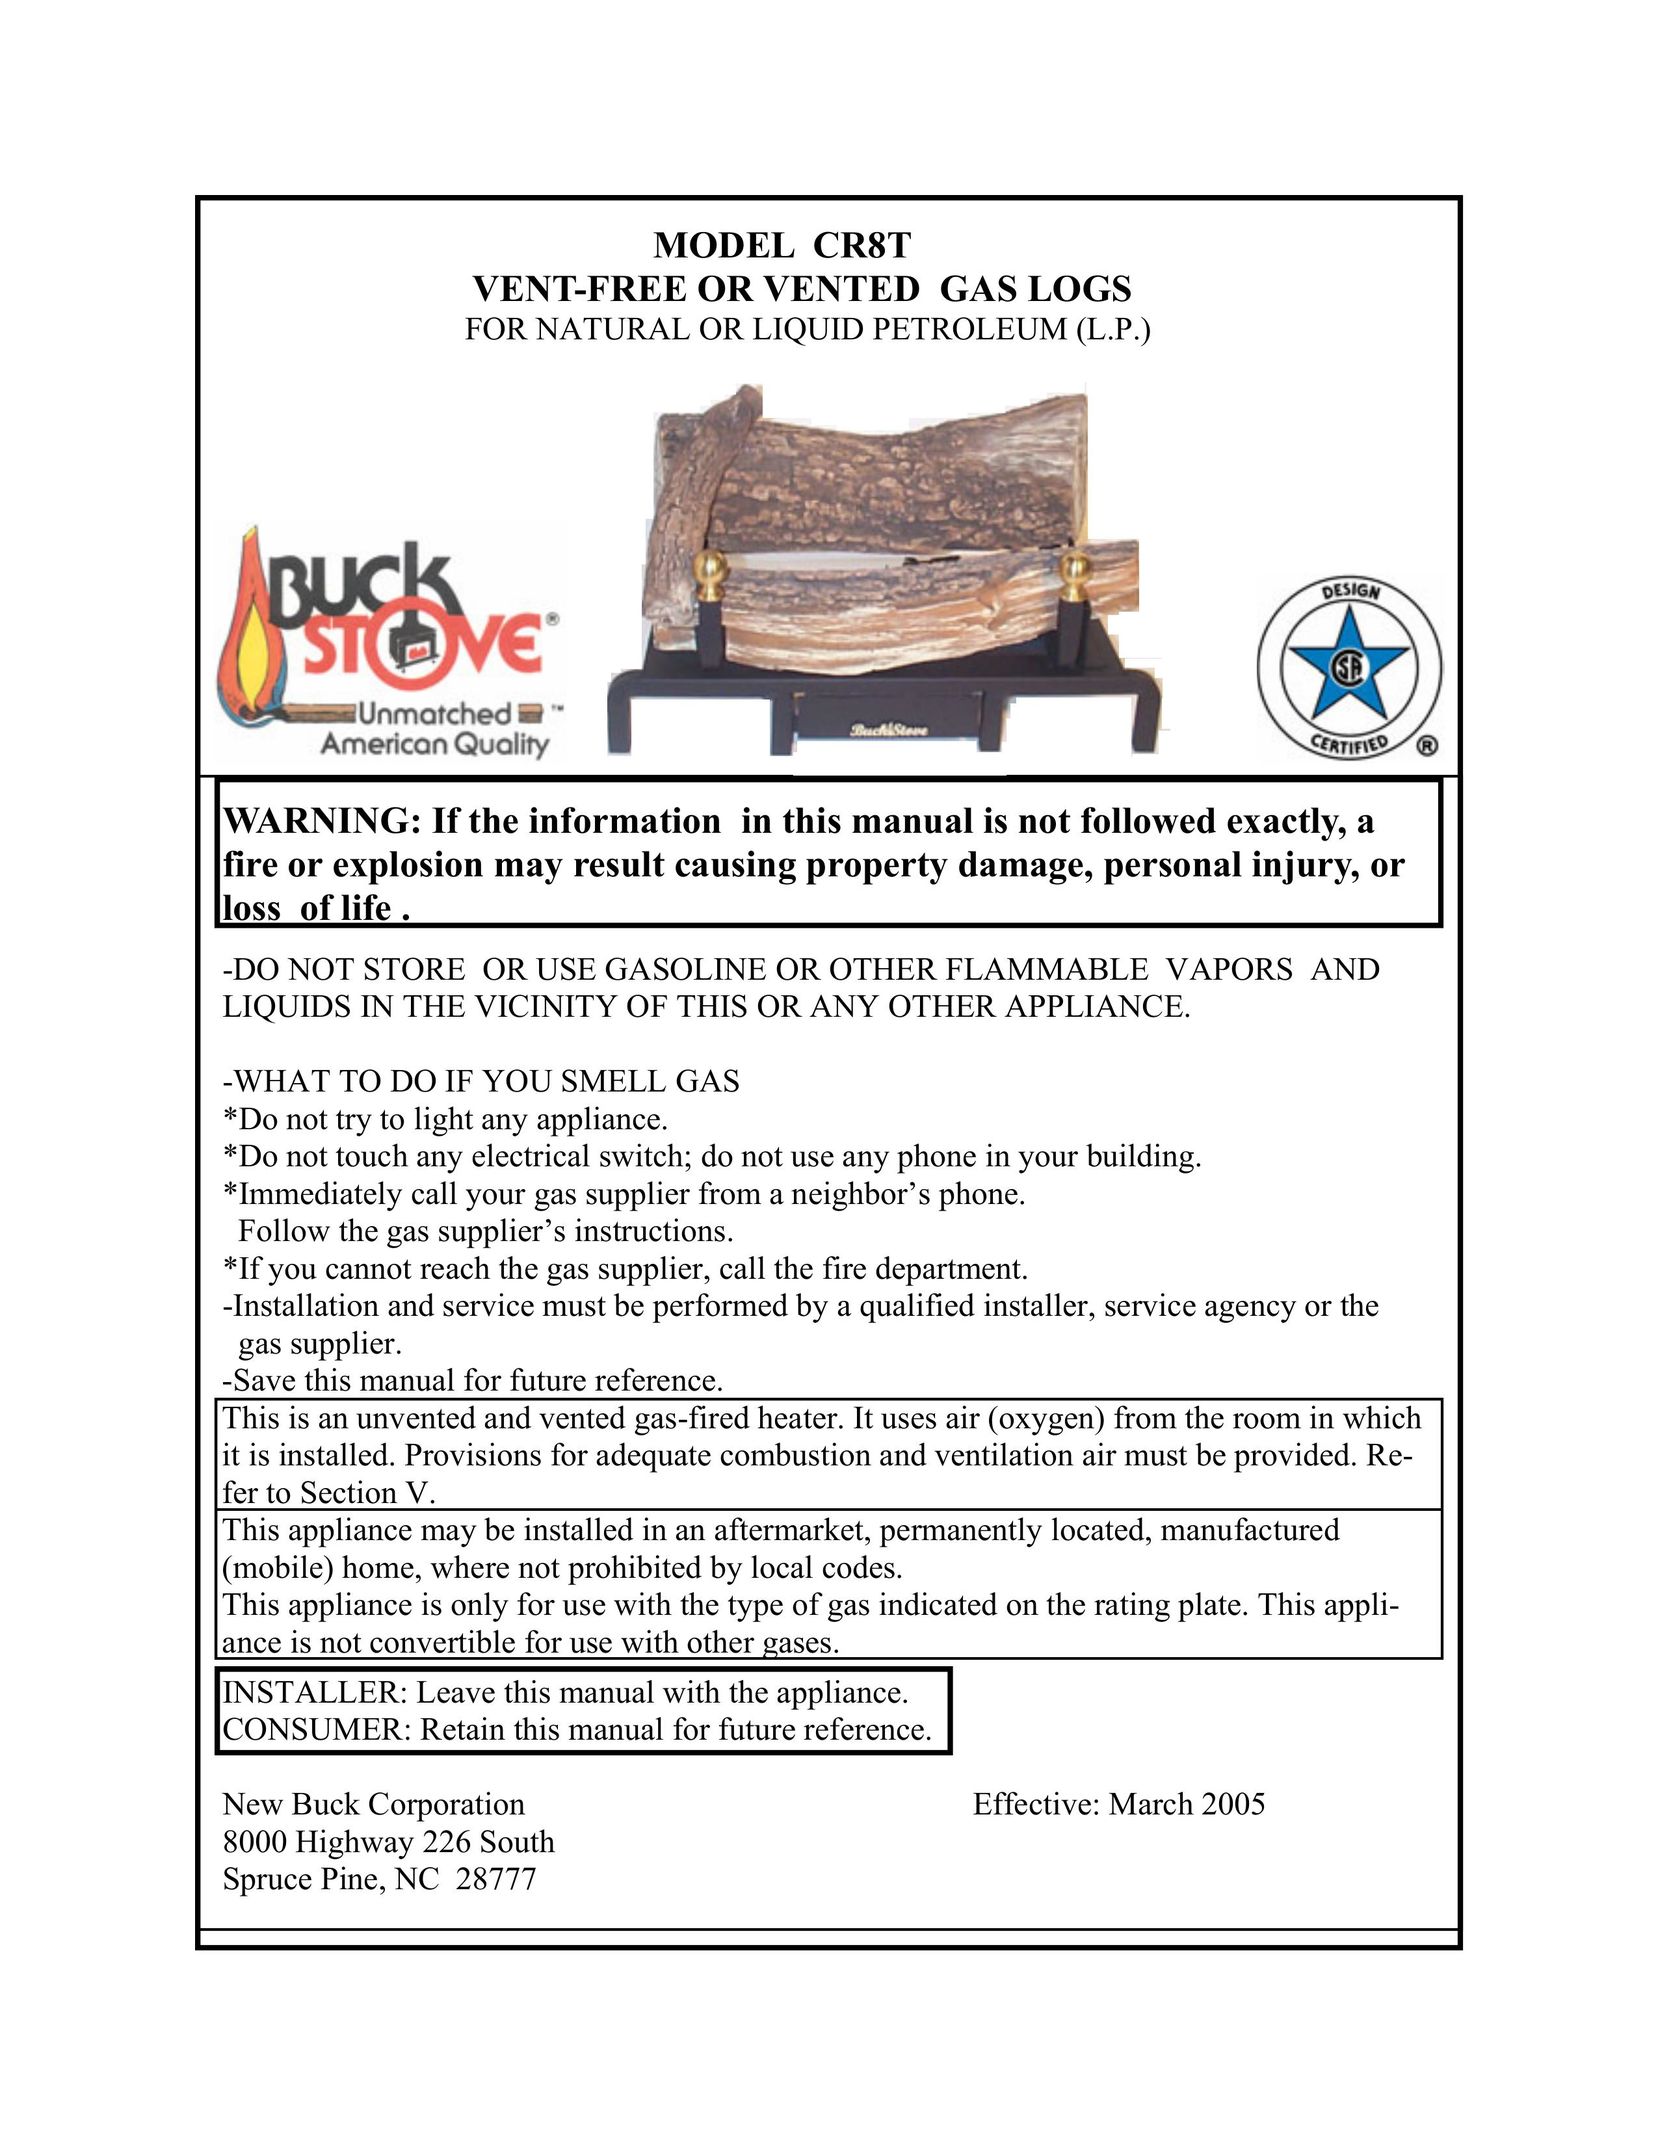 New Buck Corporation CR8T Indoor Fireplace User Manual